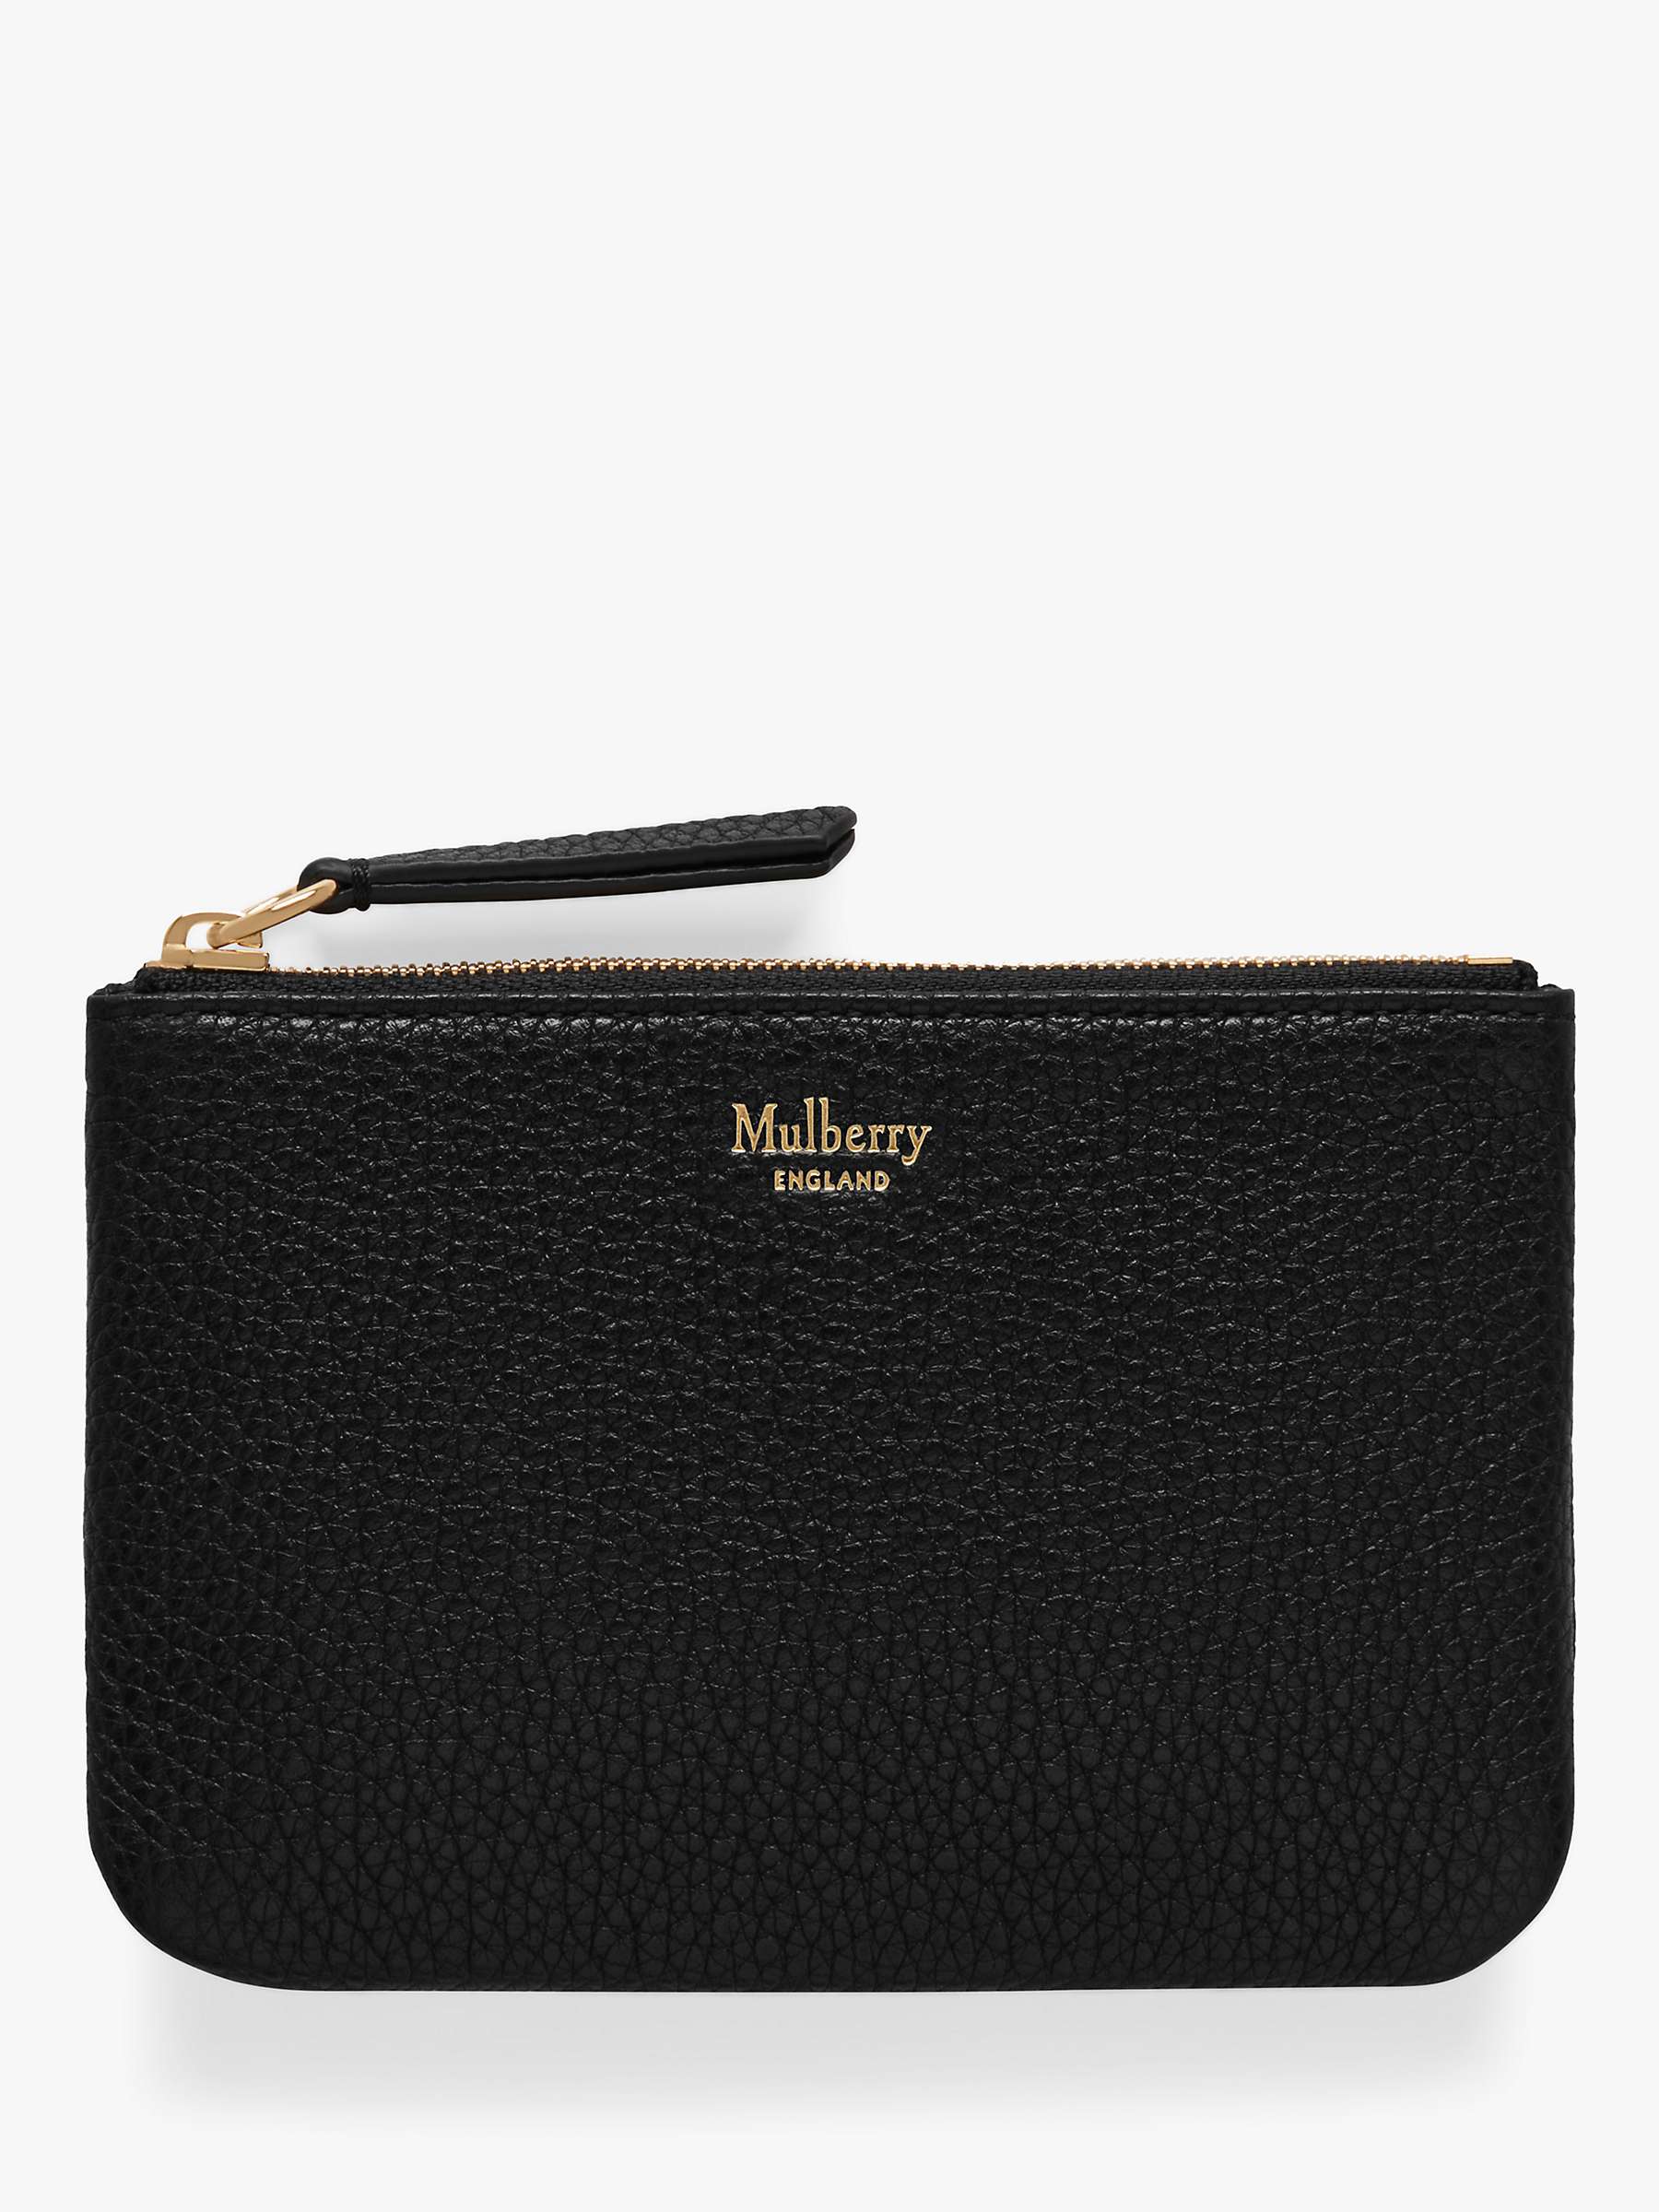 Buy Mulberry Small Classic Grain Leather Zip Coin Pouch Online at johnlewis.com